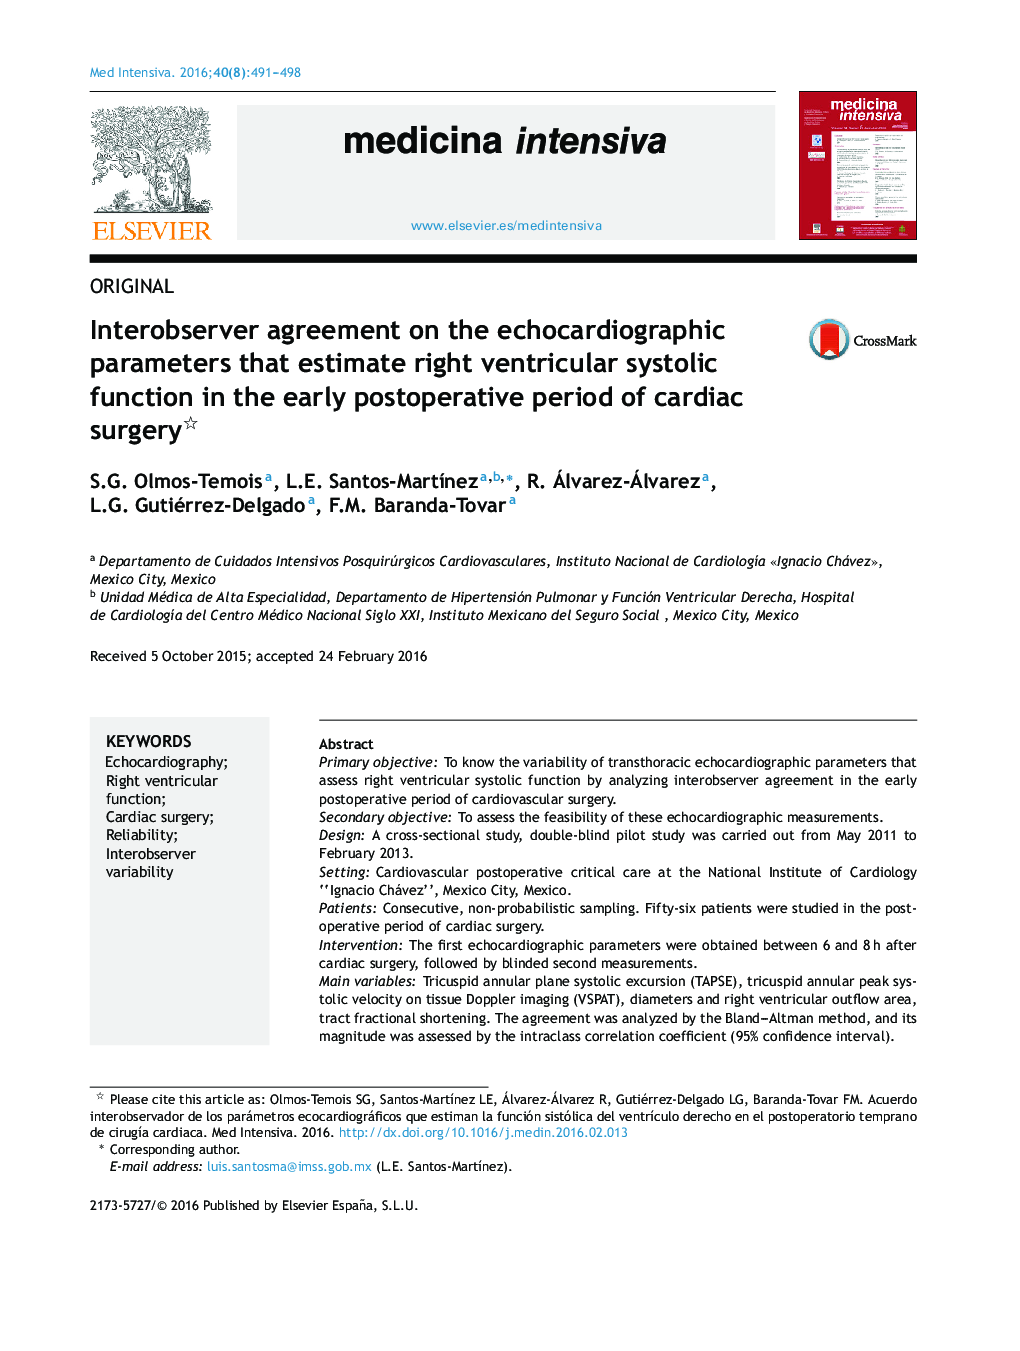 Interobserver agreement on the echocardiographic parameters that estimate right ventricular systolic function in the early postoperative period of cardiac surgery